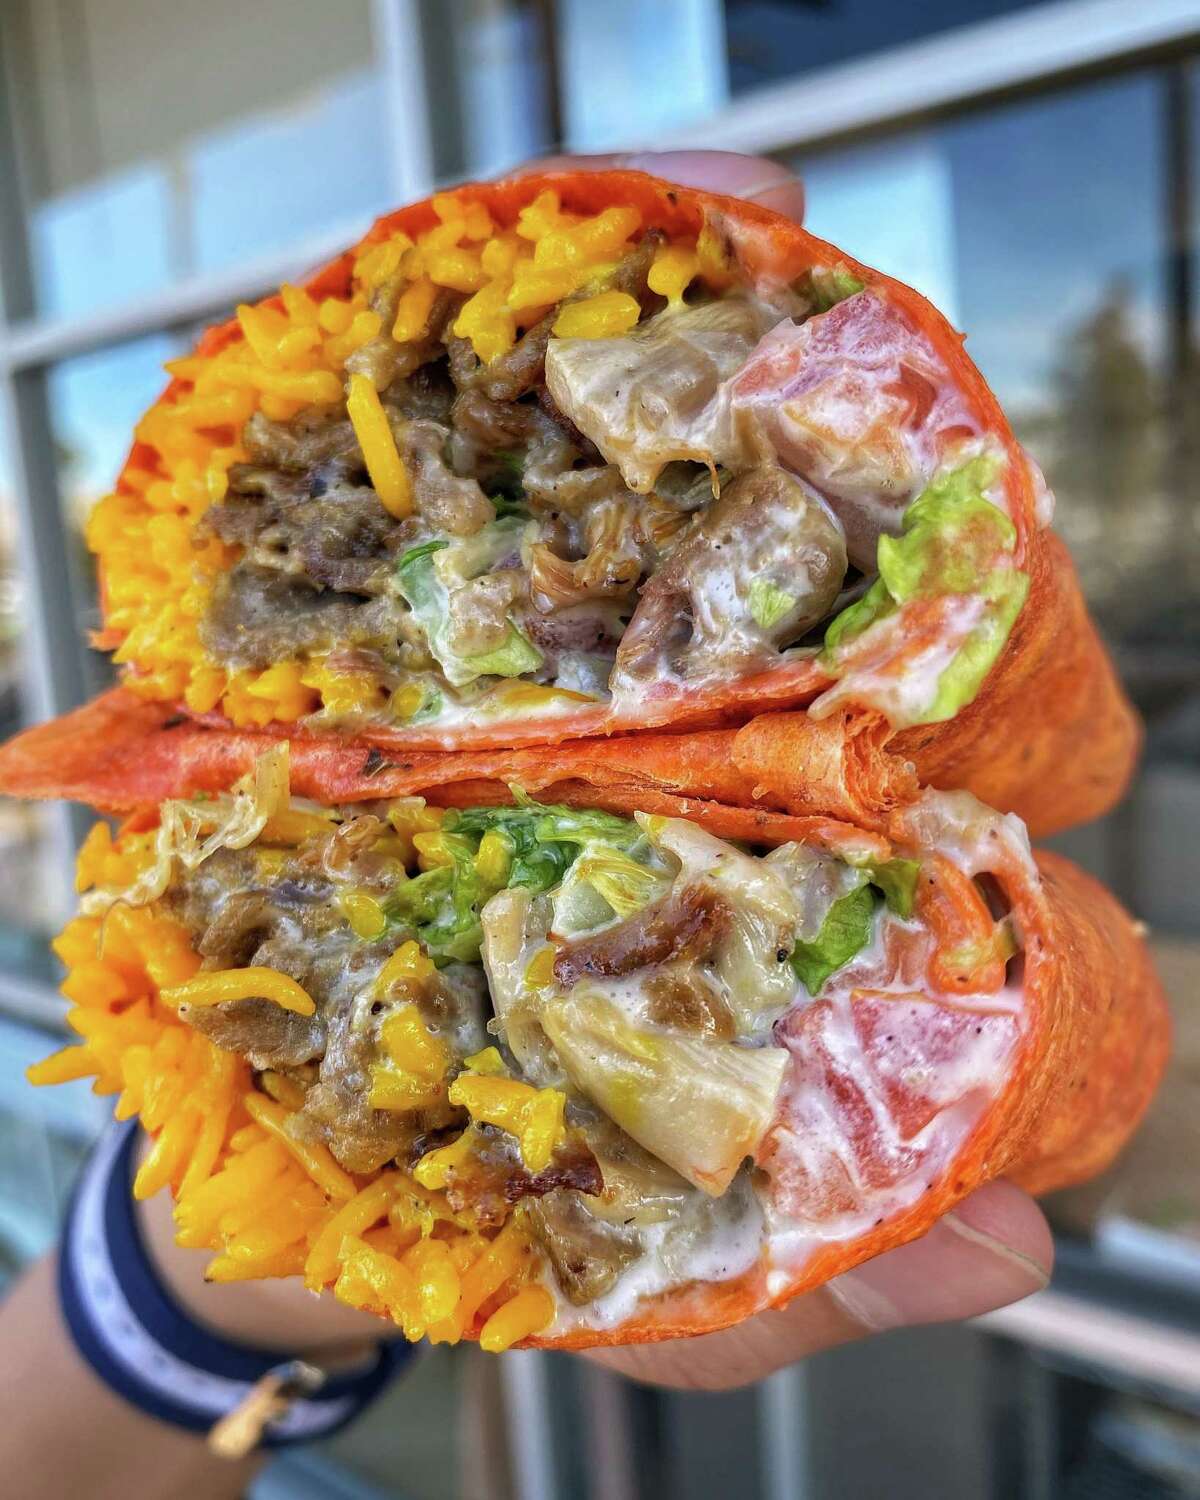 The Halal Guys is offering a new burrito stuffed with a variety of fillings, a cheese white sauce and built with a sundried tomato tortilla.